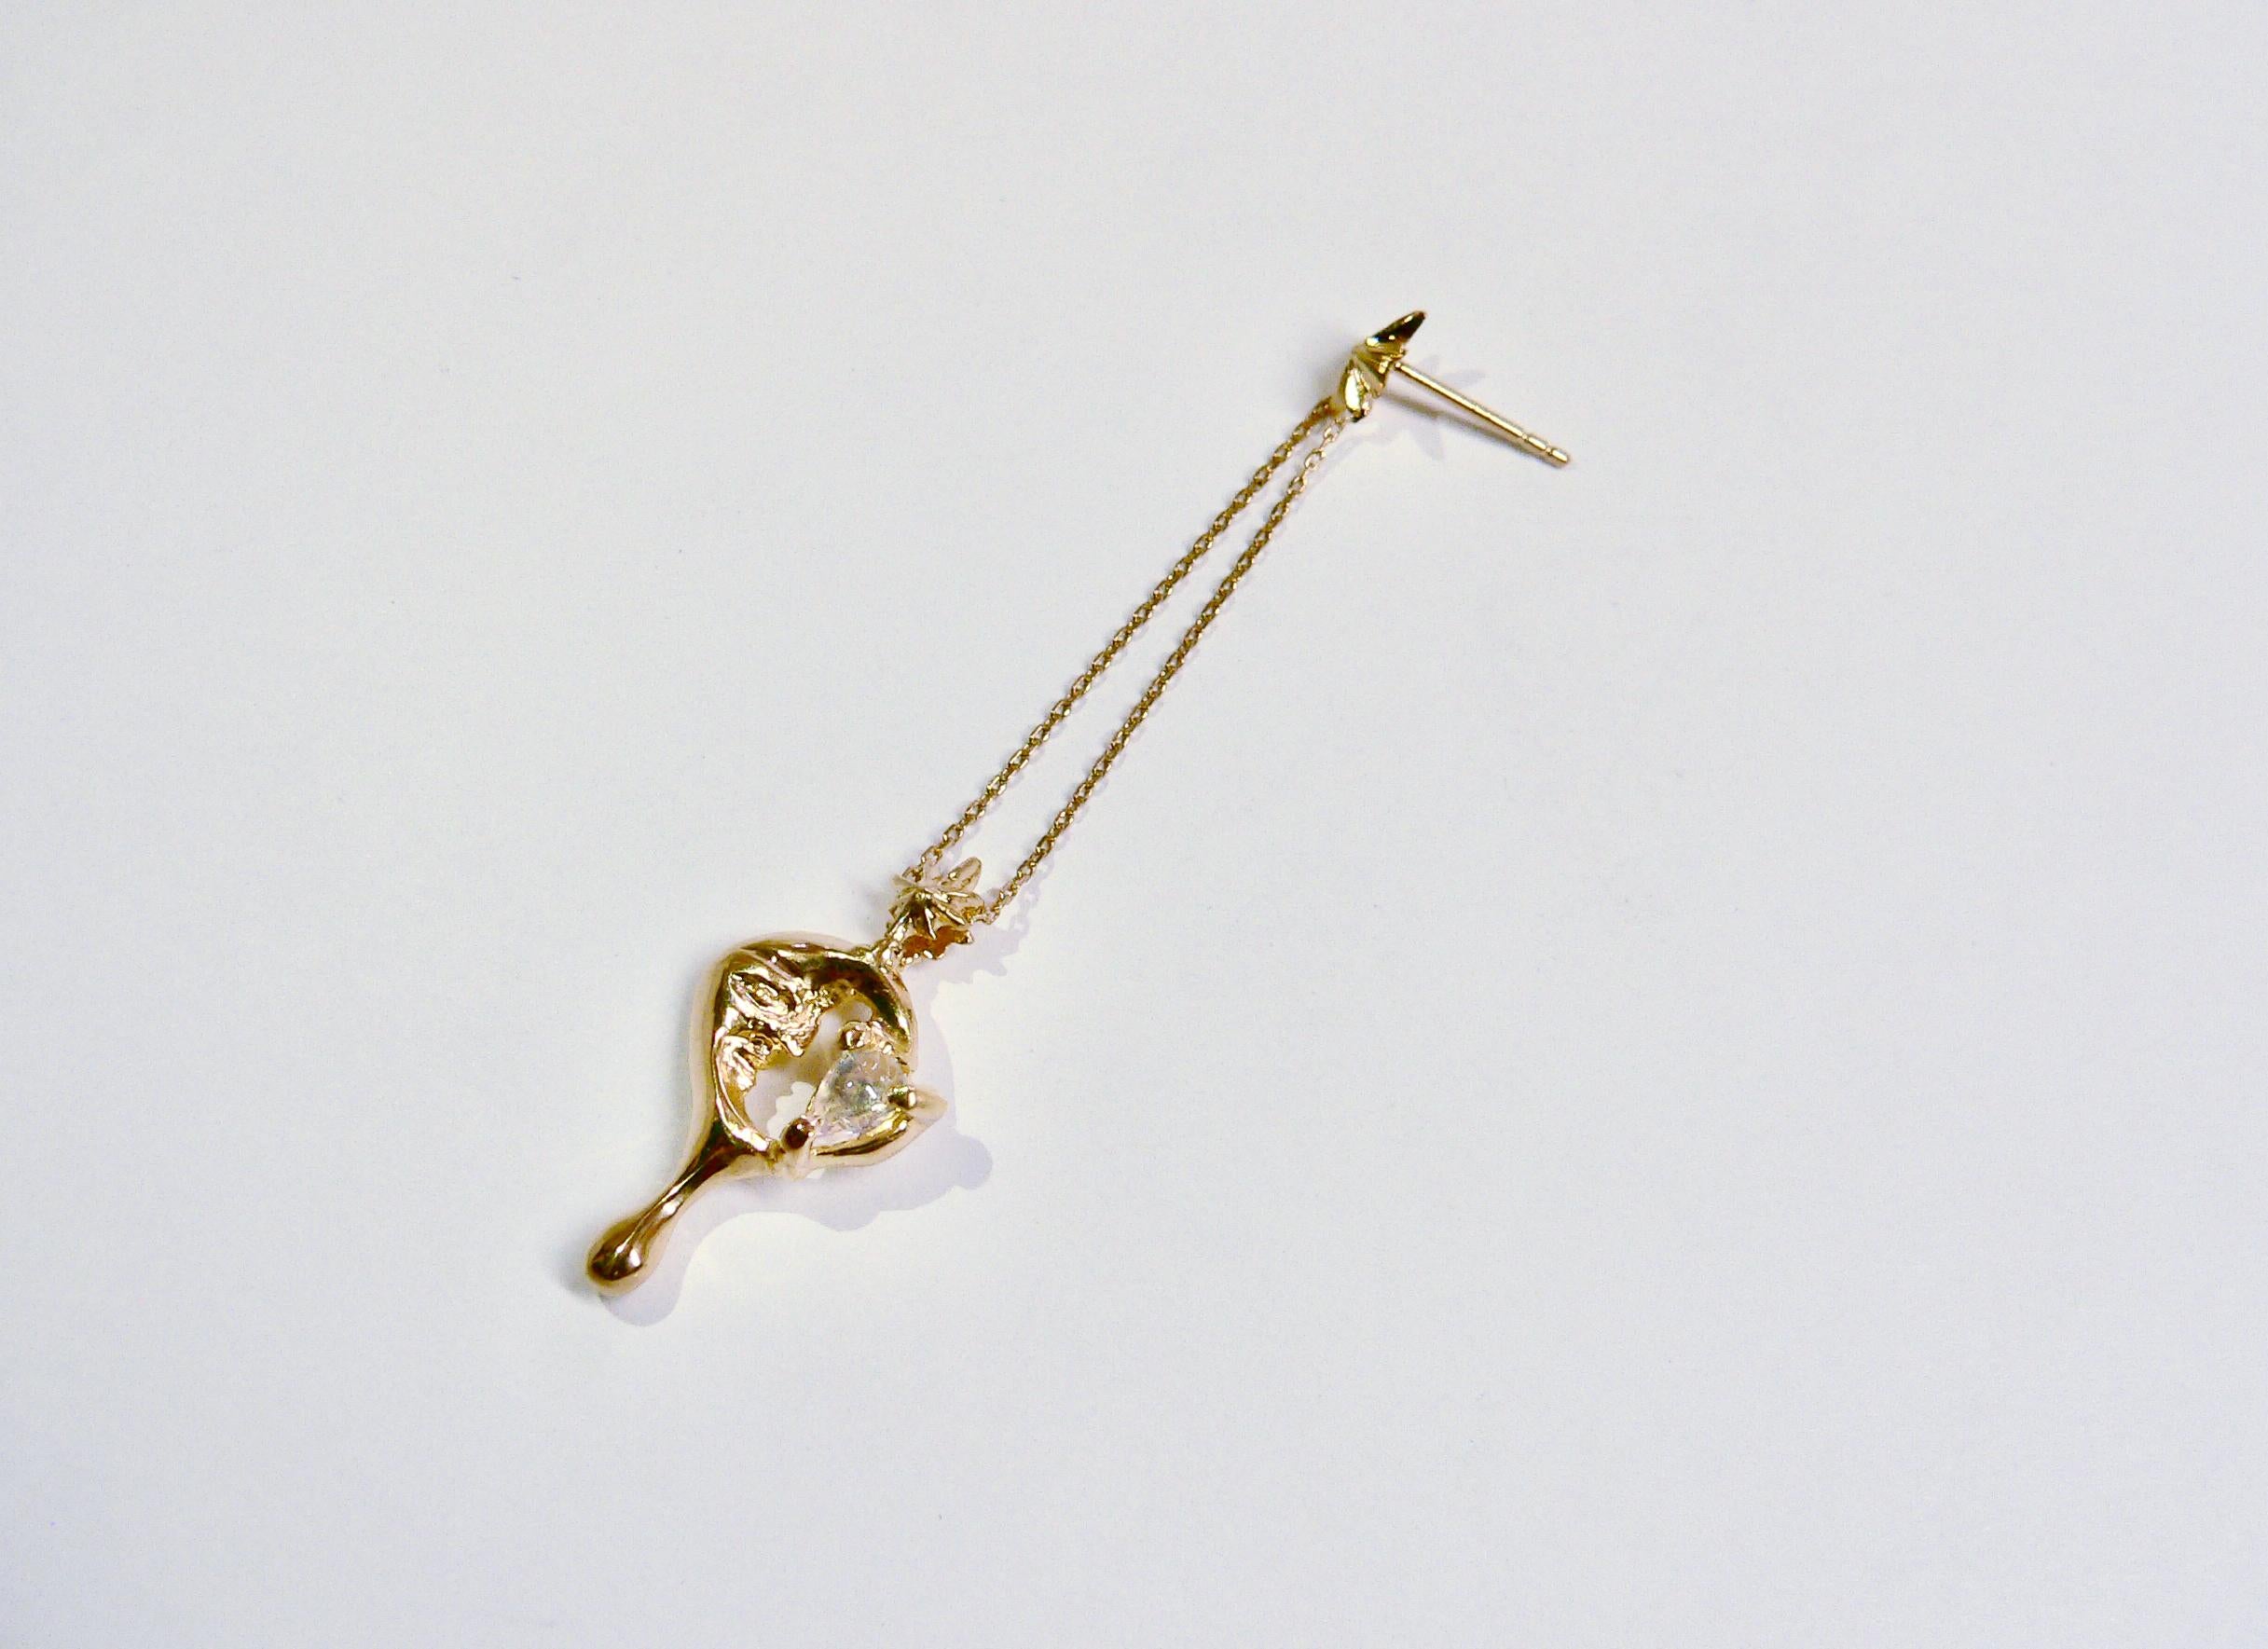 Artist Moon drop Single Earring with Moonstone, Gold-Plated Sterling Silver For Sale